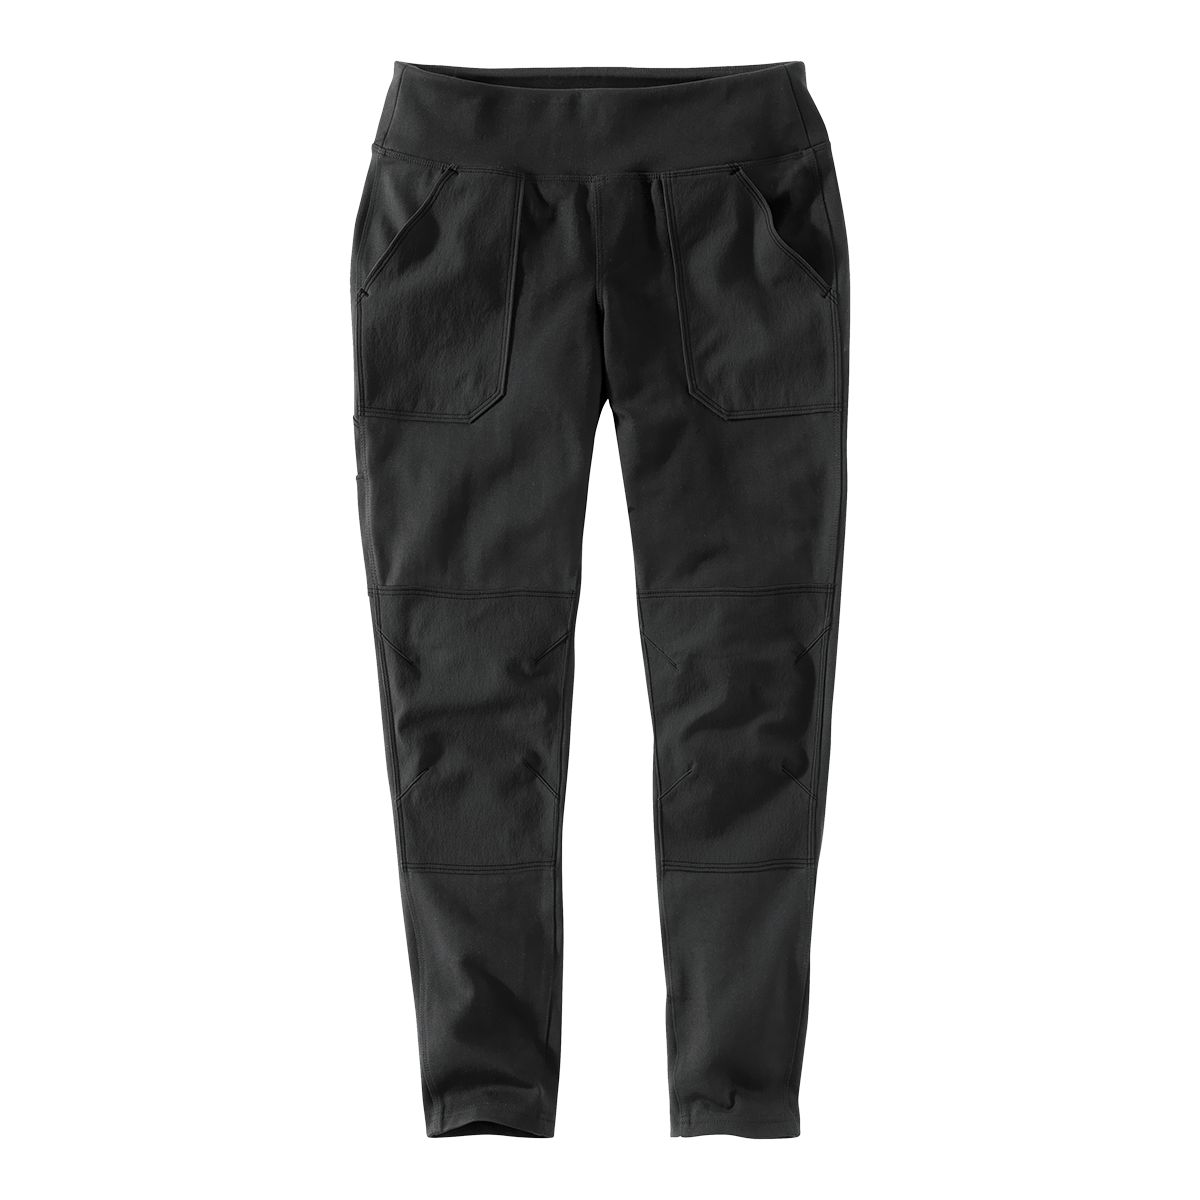 Image of Carhartt Women's Force Stretch Utility Knit Work Pants - Black